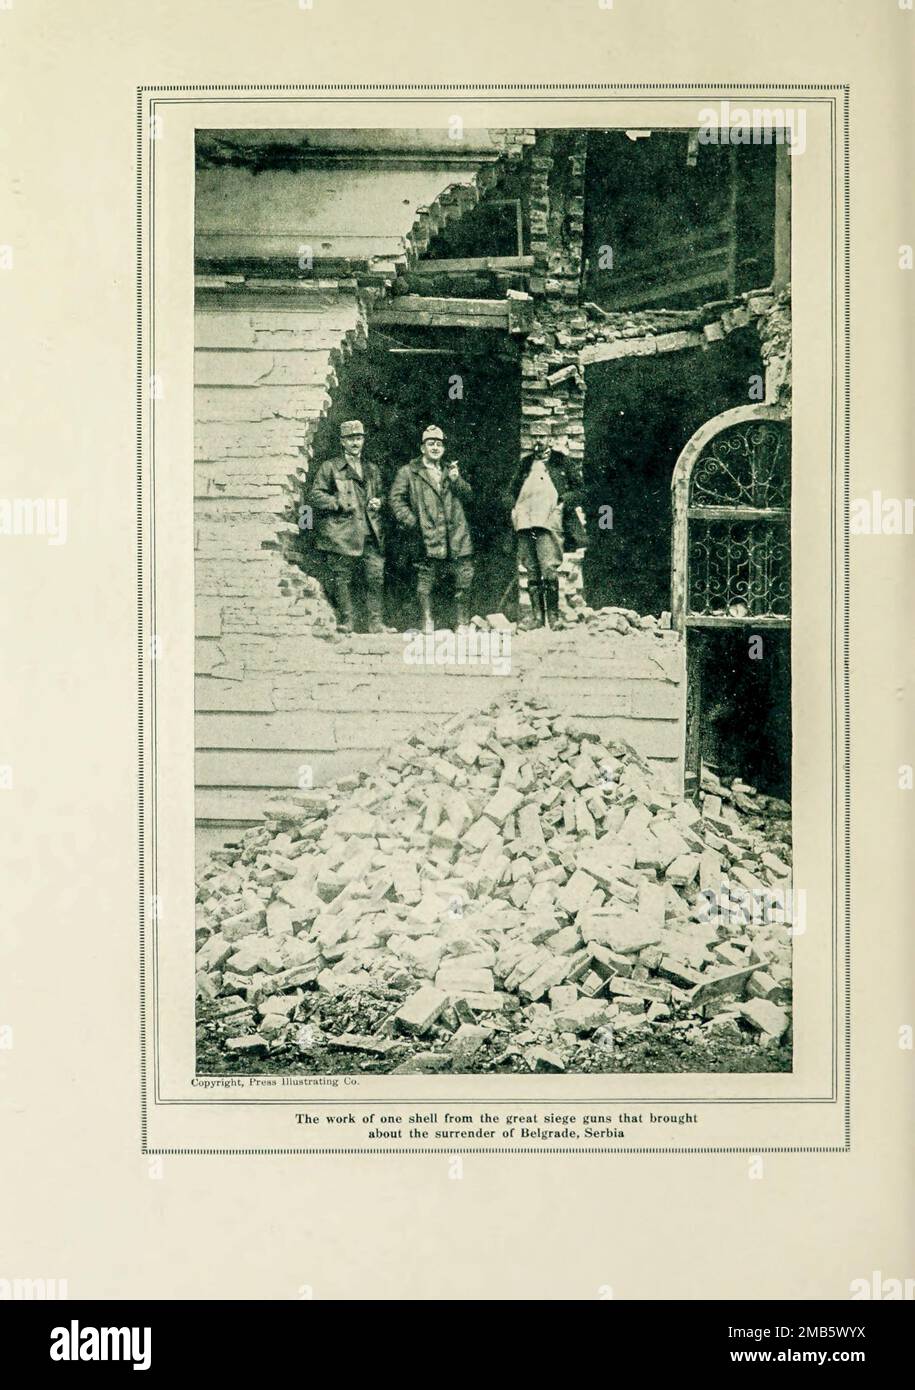 Destruction Wrought by a 30.5-Centimeter Gun in Belgrade from the book The story of the great war; the complete historical records of events to date DIPLOMATIC AND STATE PAPERS by Reynolds, Francis Joseph, 1867-1937; Churchill, Allen Leon; Miller, Francis Trevelyan, 1877-1959; Wood, Leonard, 1860-1927; Knight, Austin Melvin, 1854-1927; Palmer, Frederick, 1873-1958; Simonds, Frank Herbert, 1878-; Ruhl, Arthur Brown, 1876-  Volume VIII Published 1920 Stock Photo